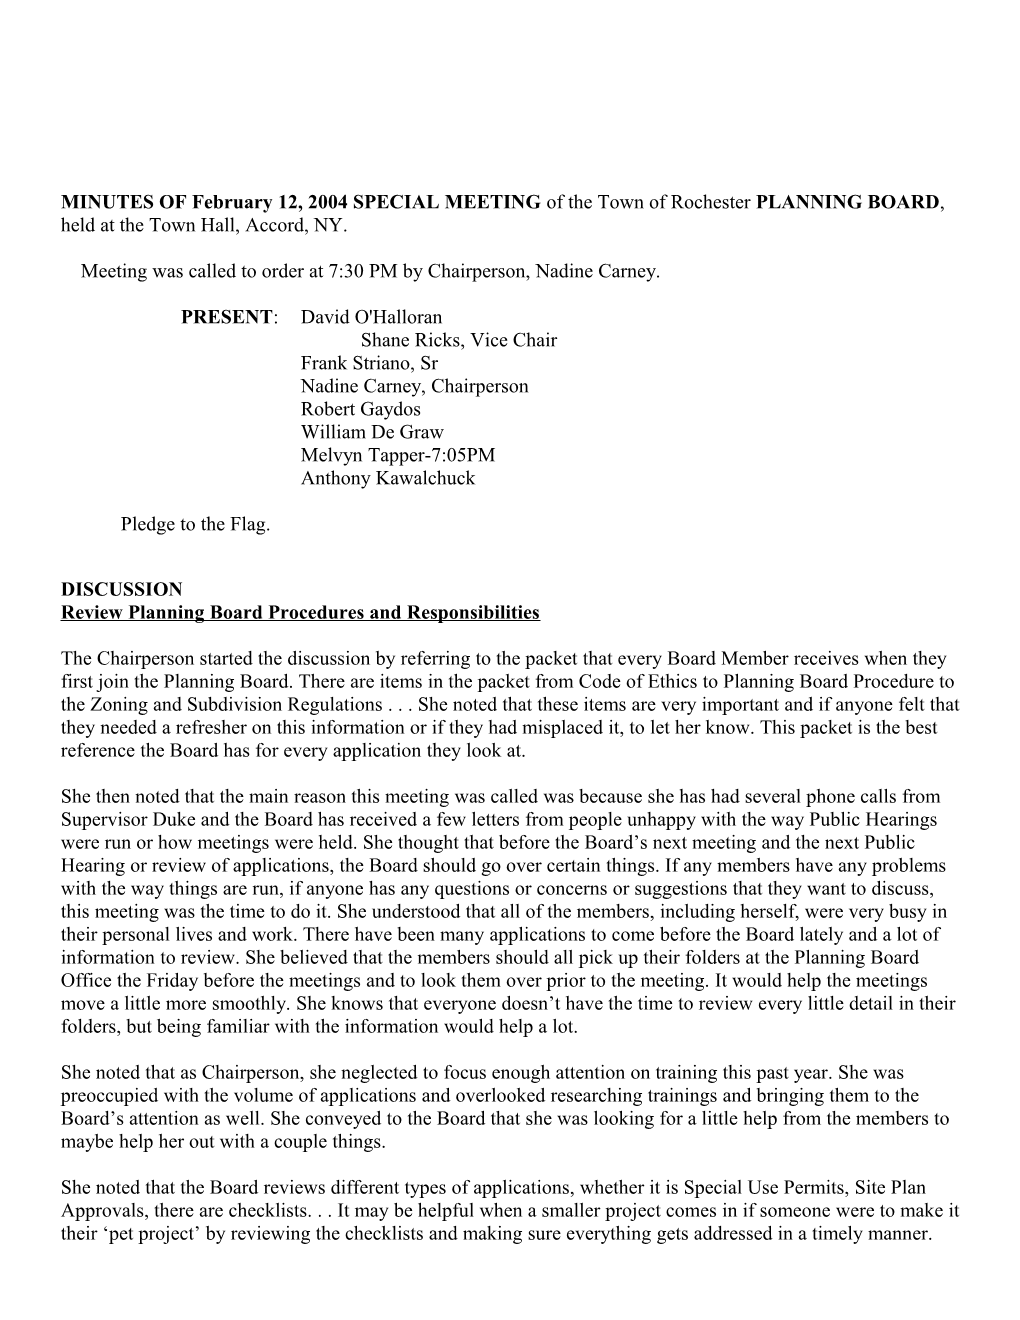 MINUTES of February 12, 2004 SPECIAL MEETING of the Town of Rochester PLANNING BOARD, Held